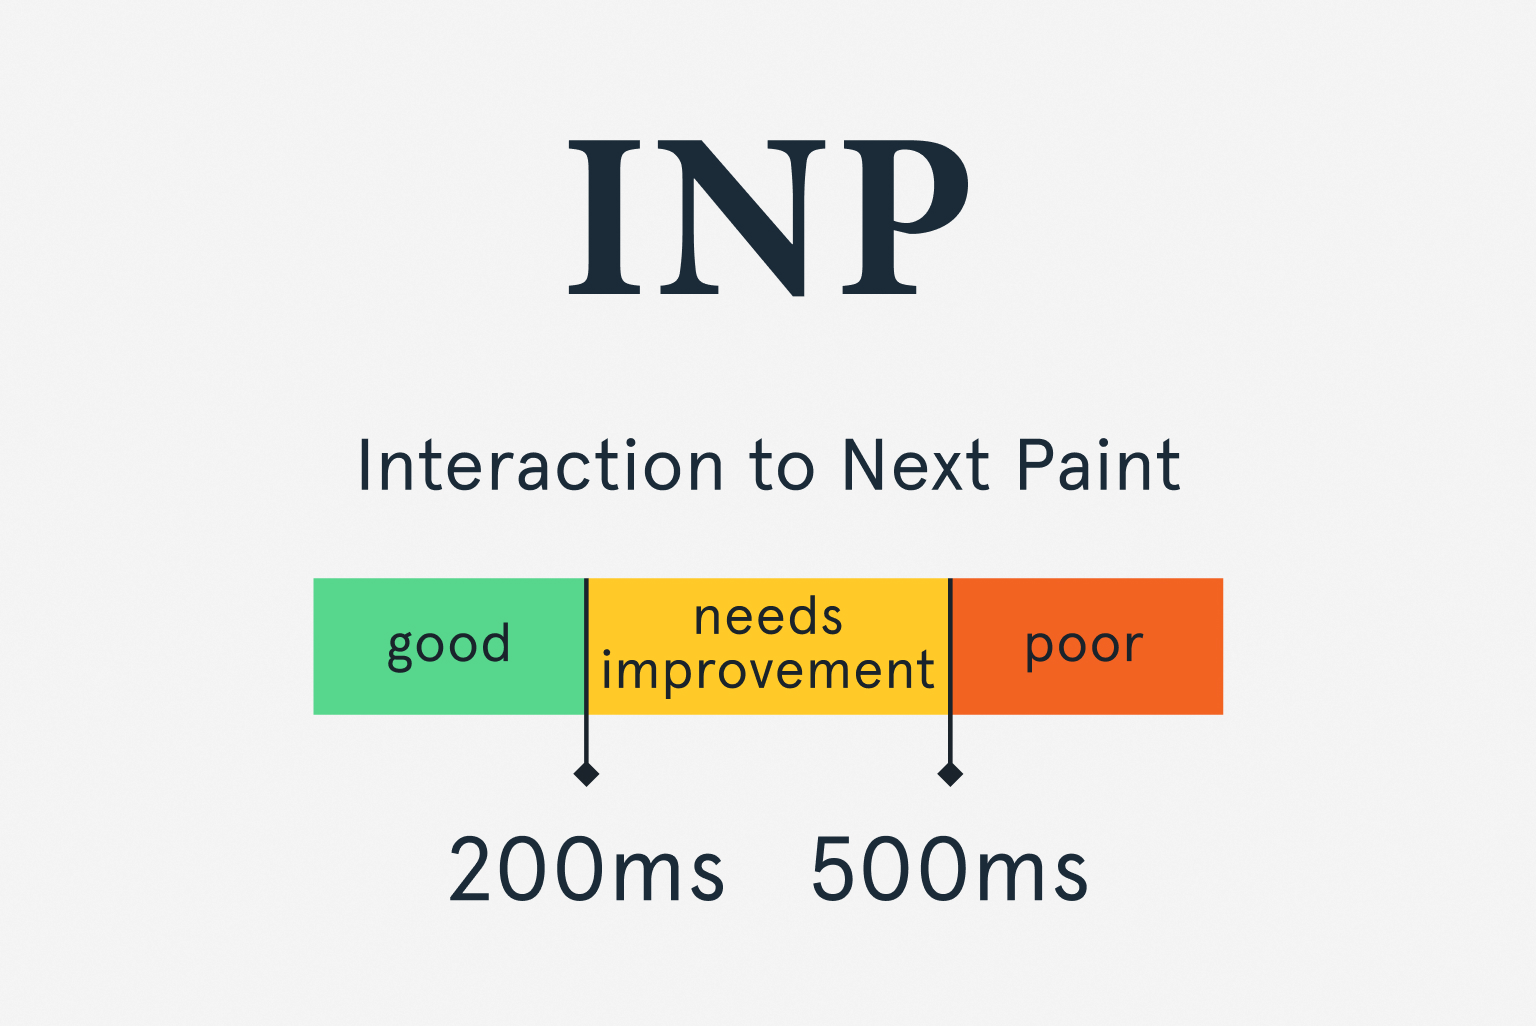 INP benchmarks